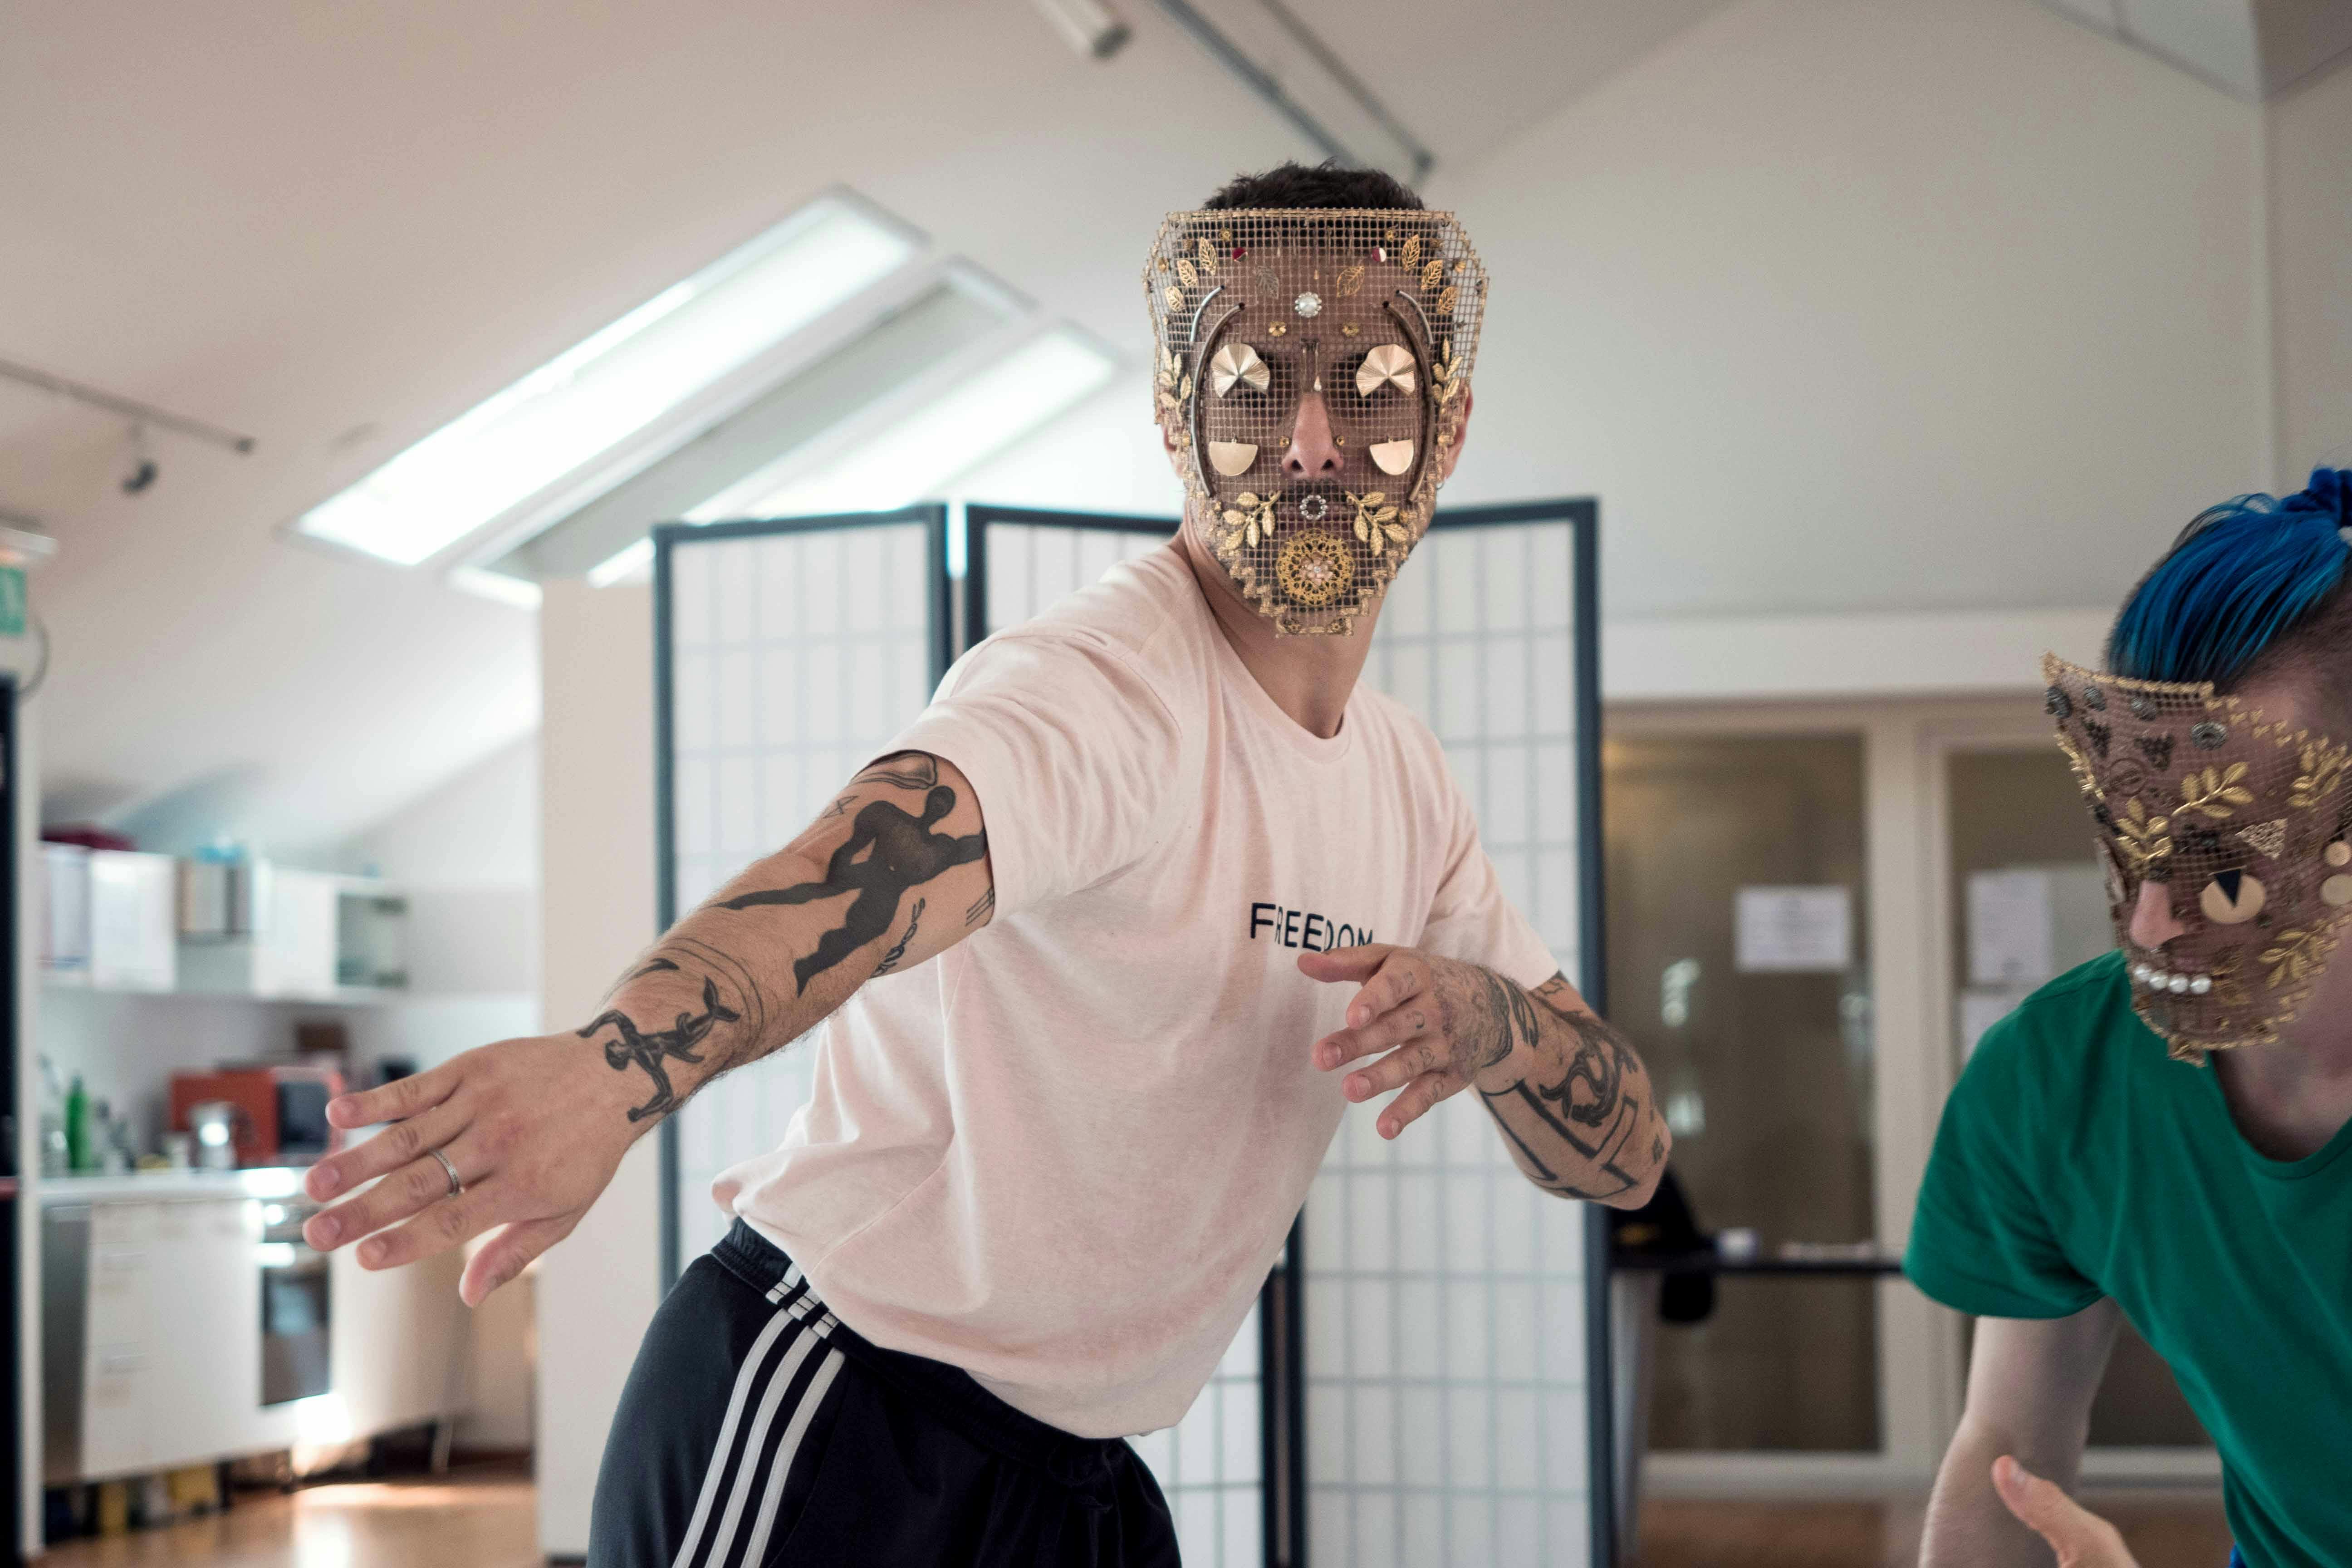 Two dancers in rehearsal. Both wear a reticulated mask, decorated with gold and steel leaves, foils and shapes. 